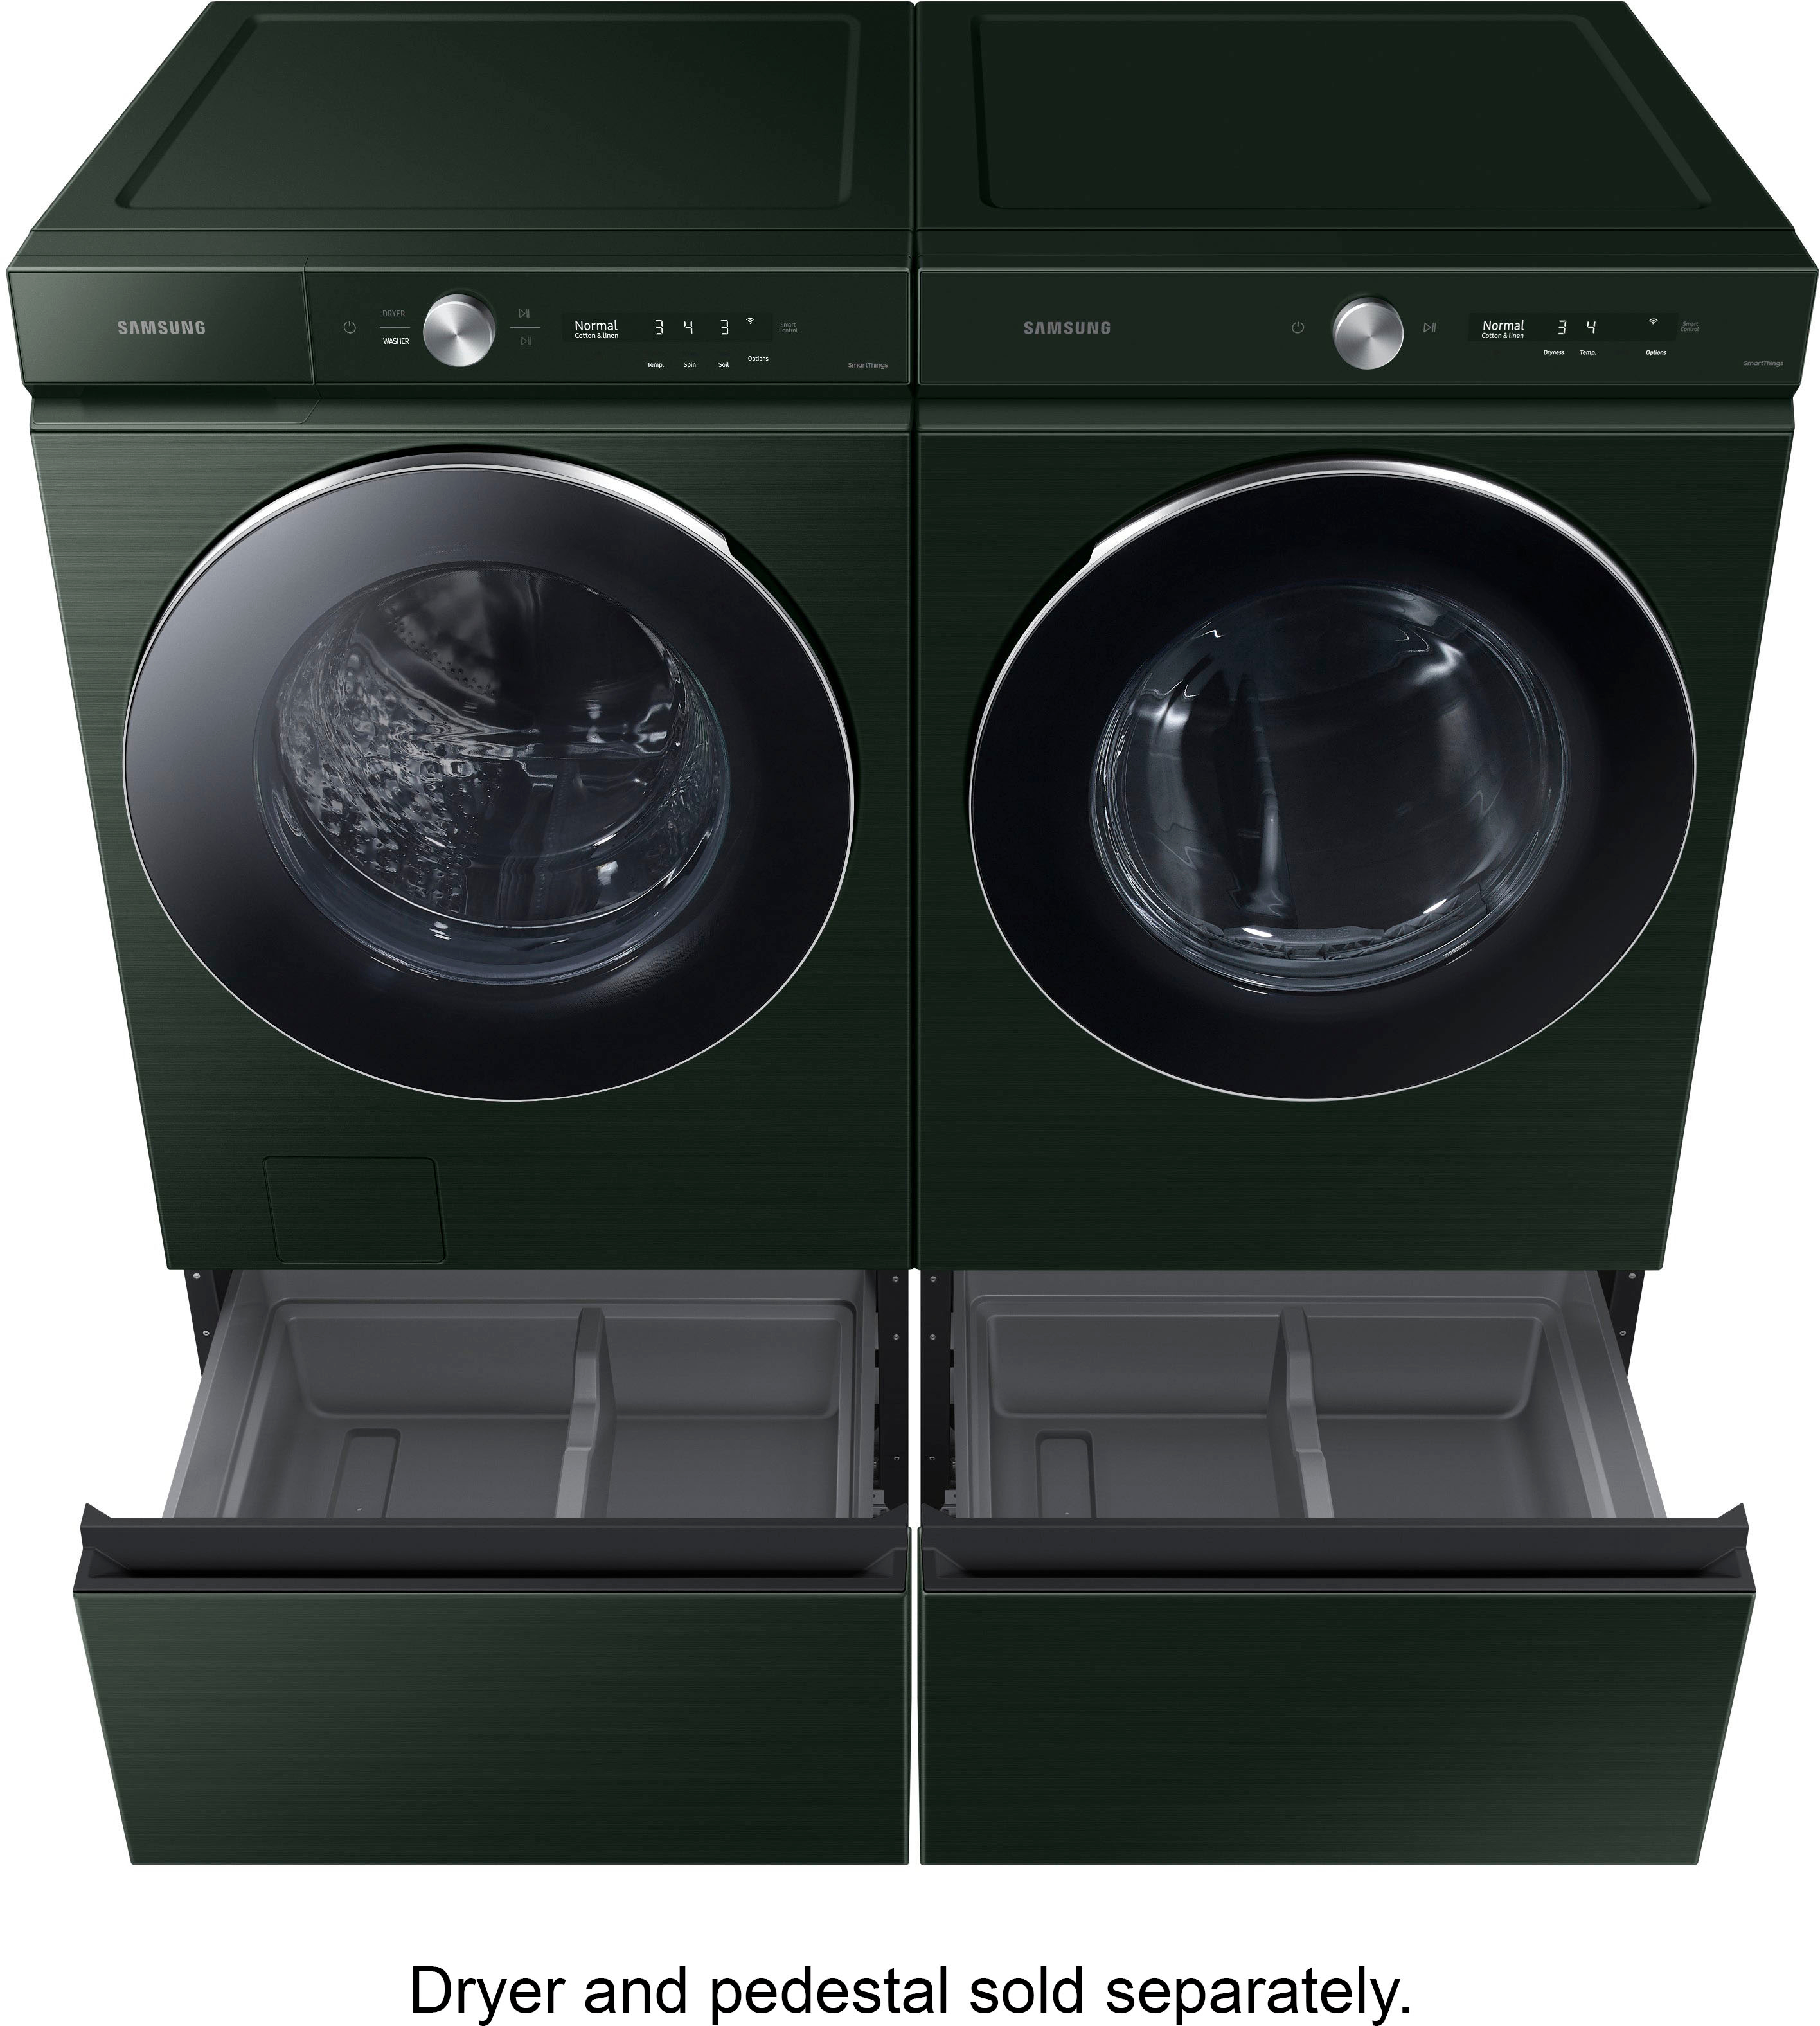 The Samsung Bespoke Ultra Capacity Front Loading Washer and Dryer